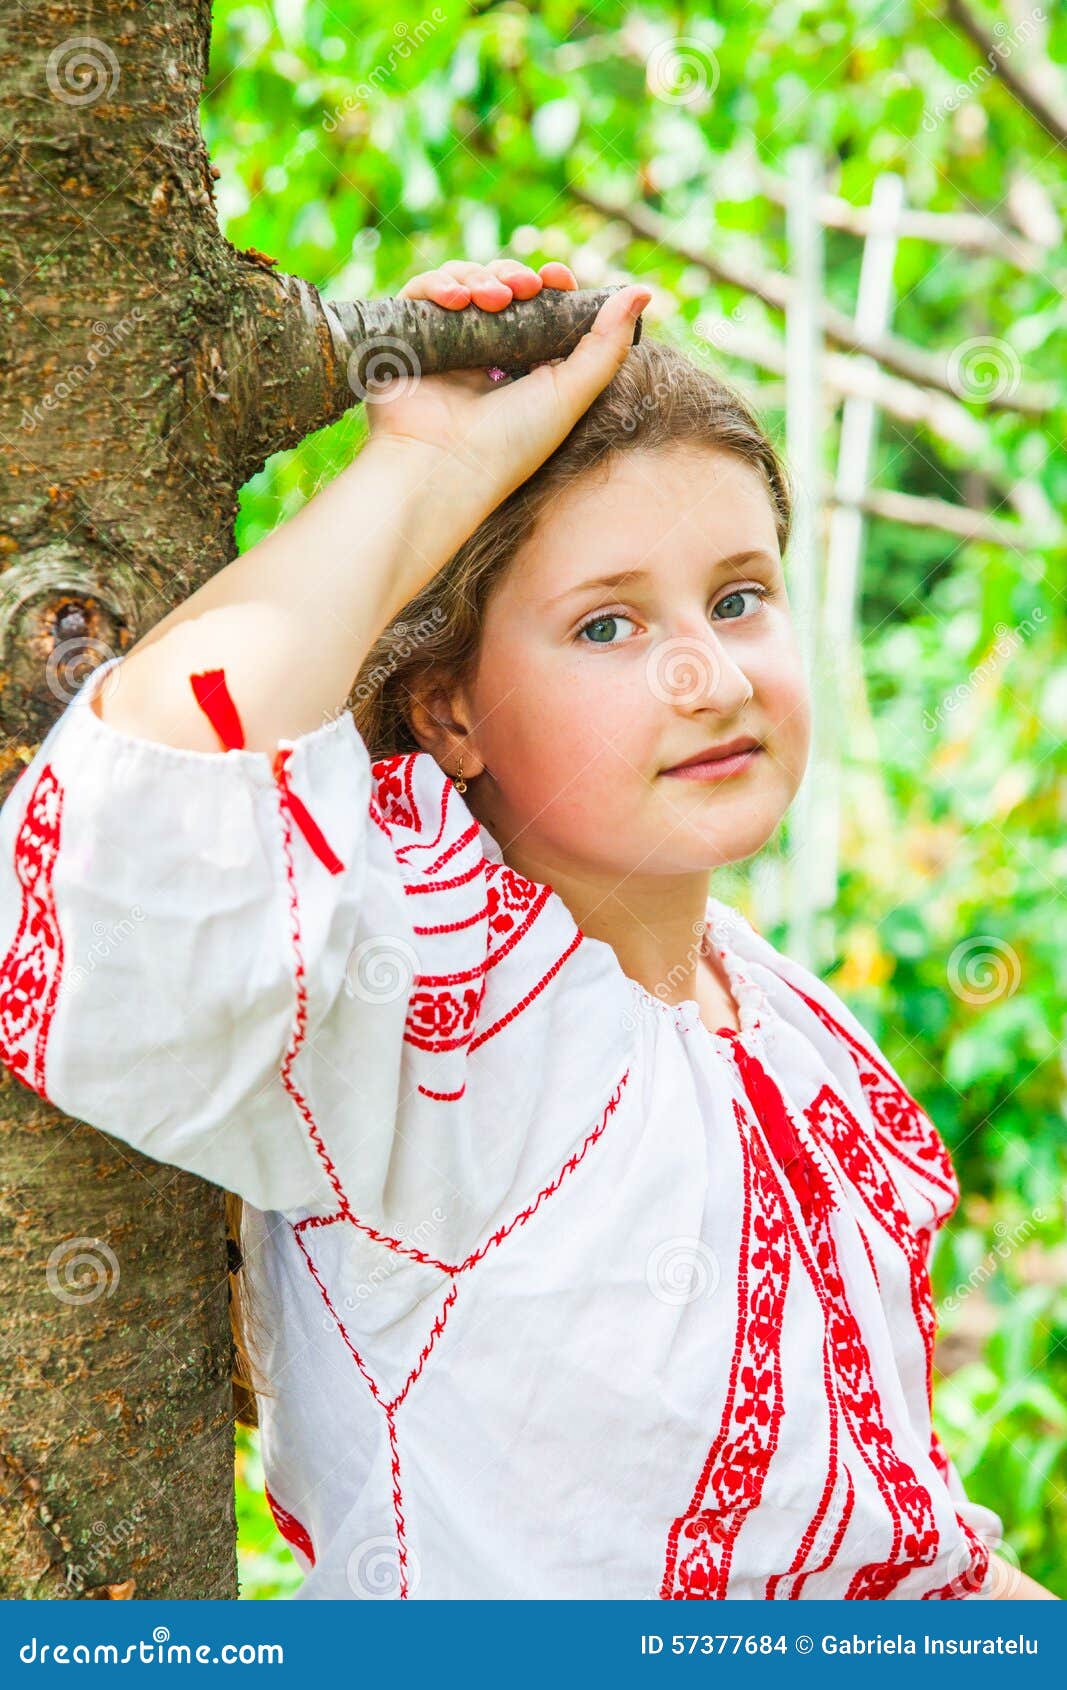 10 year old girl stock photo. Image of little, portrait - 57377684